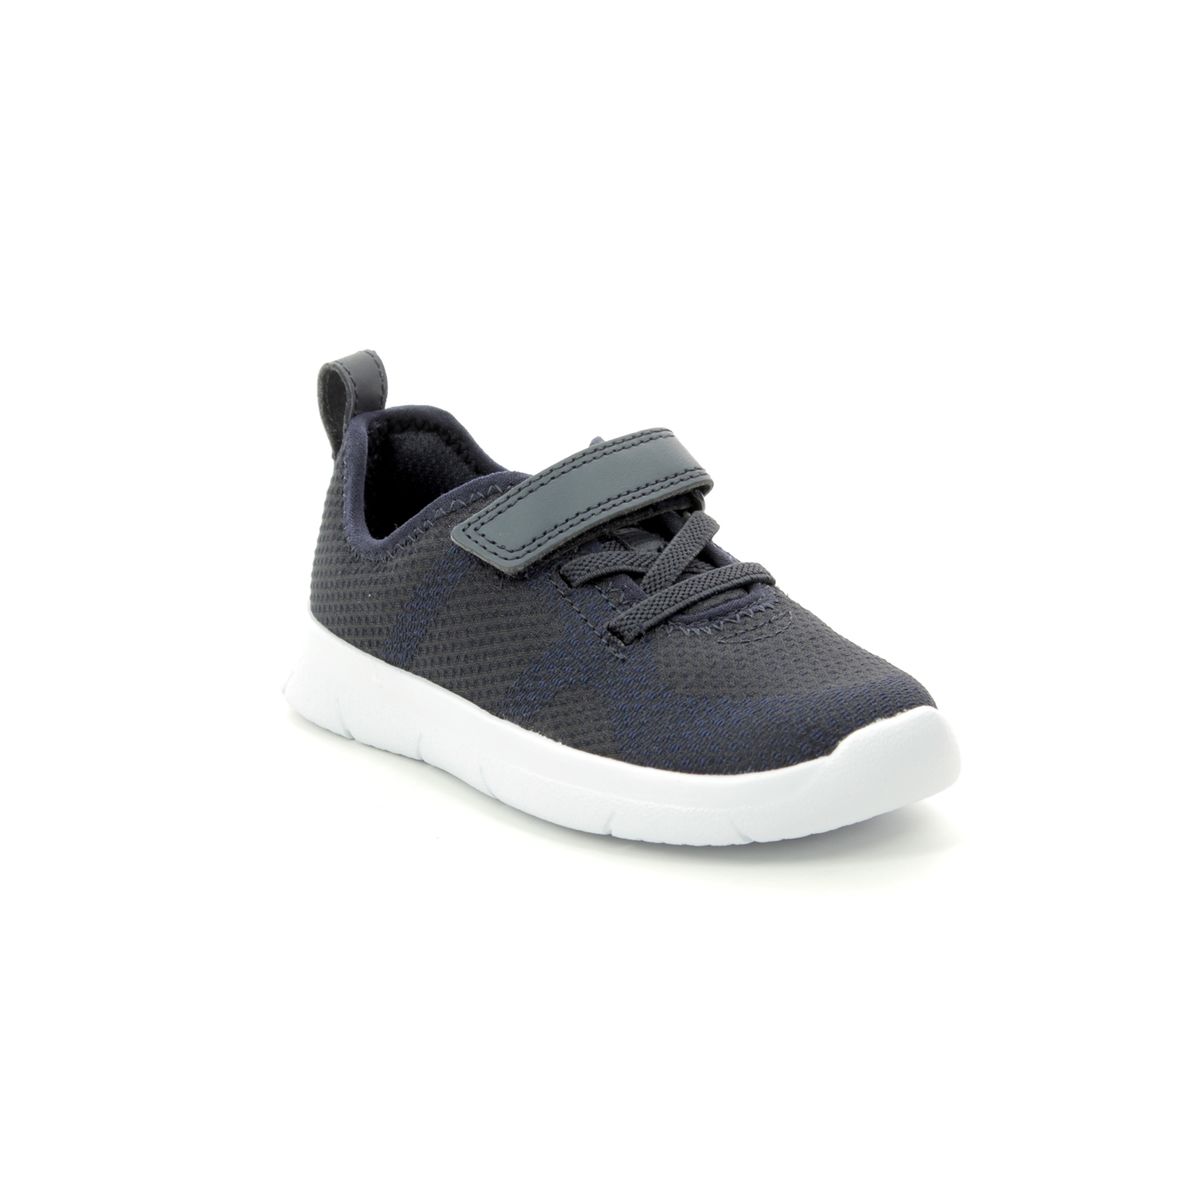 Clarks Ath Flux T Navy Kids Toddler Boys Trainers 412696F In Size 6 In Plain Navy F Width Fitting Regular Fit For kids